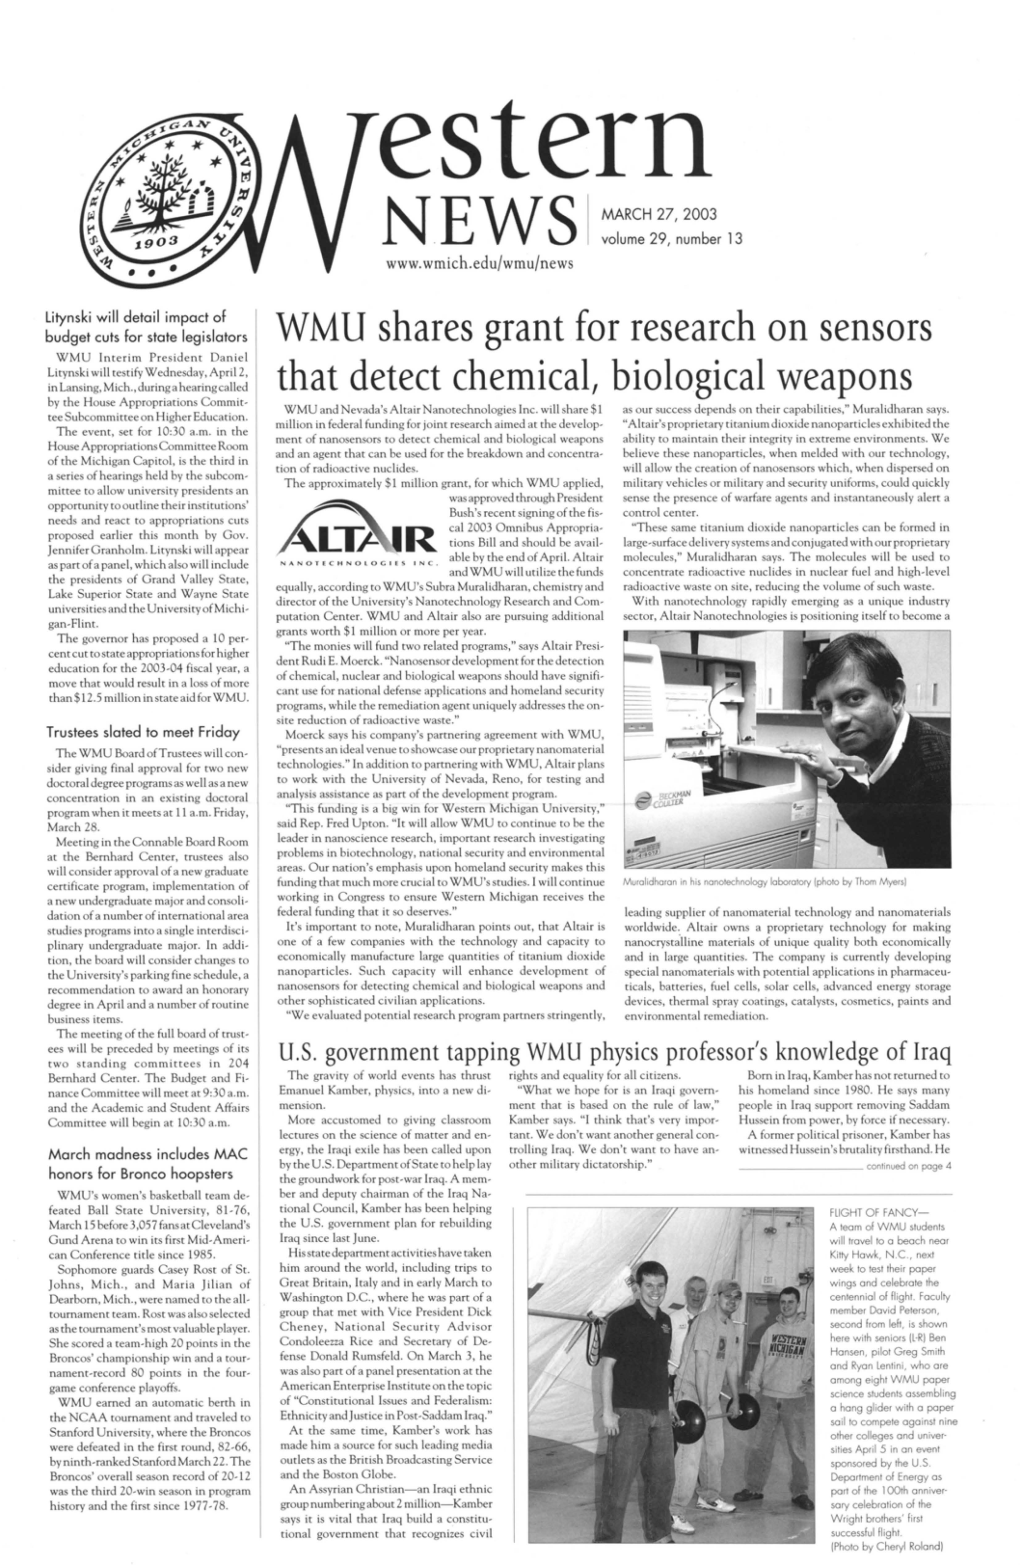 WMU Shares Grant for Research on Sensors That Detect Chemical, Biological Weapons